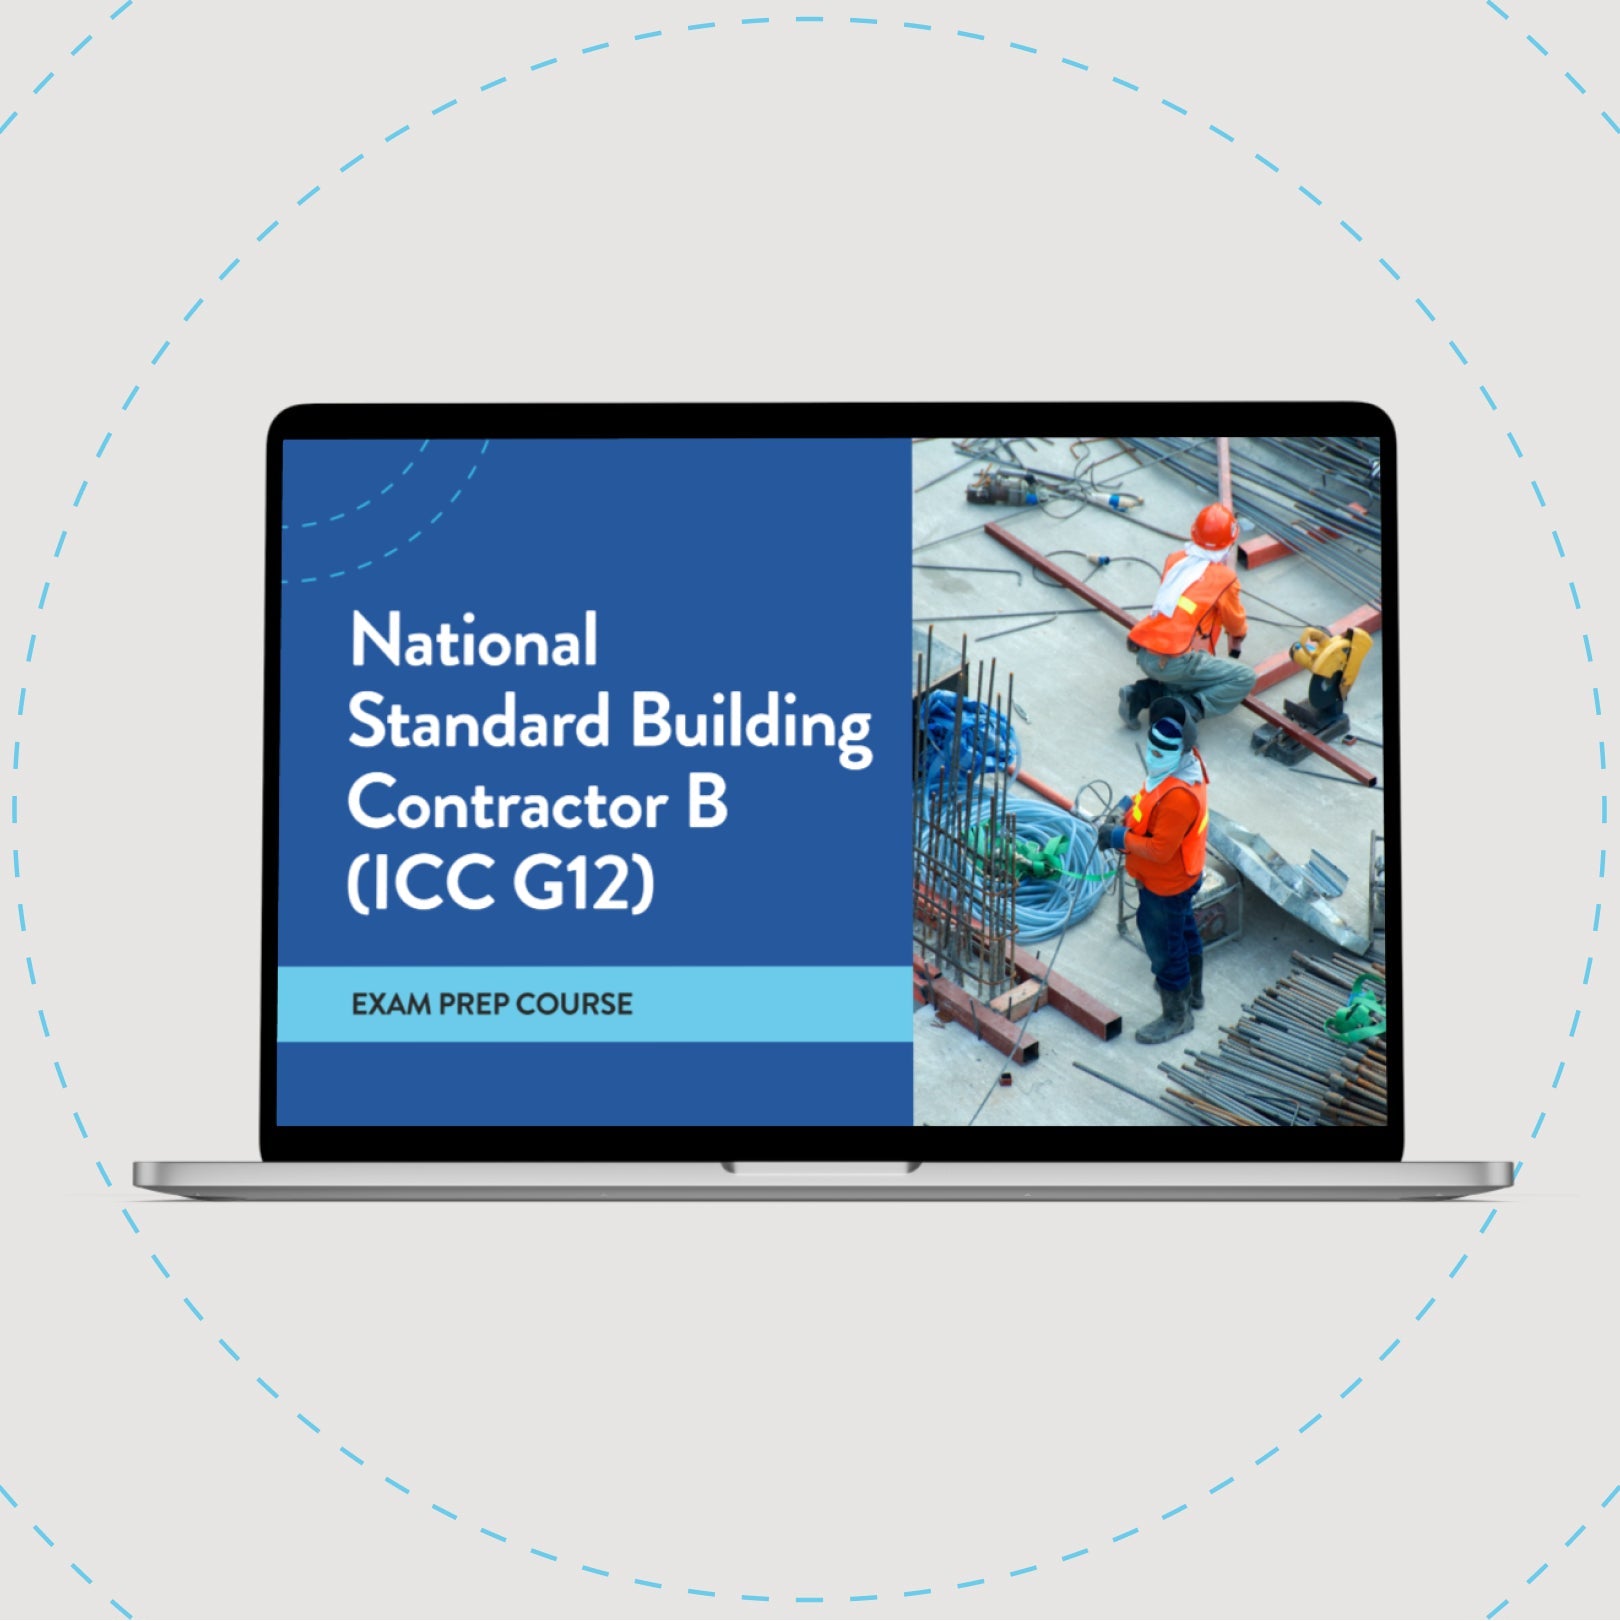 National Standard Building Contractor B (ICC G12) Exam Prep Course